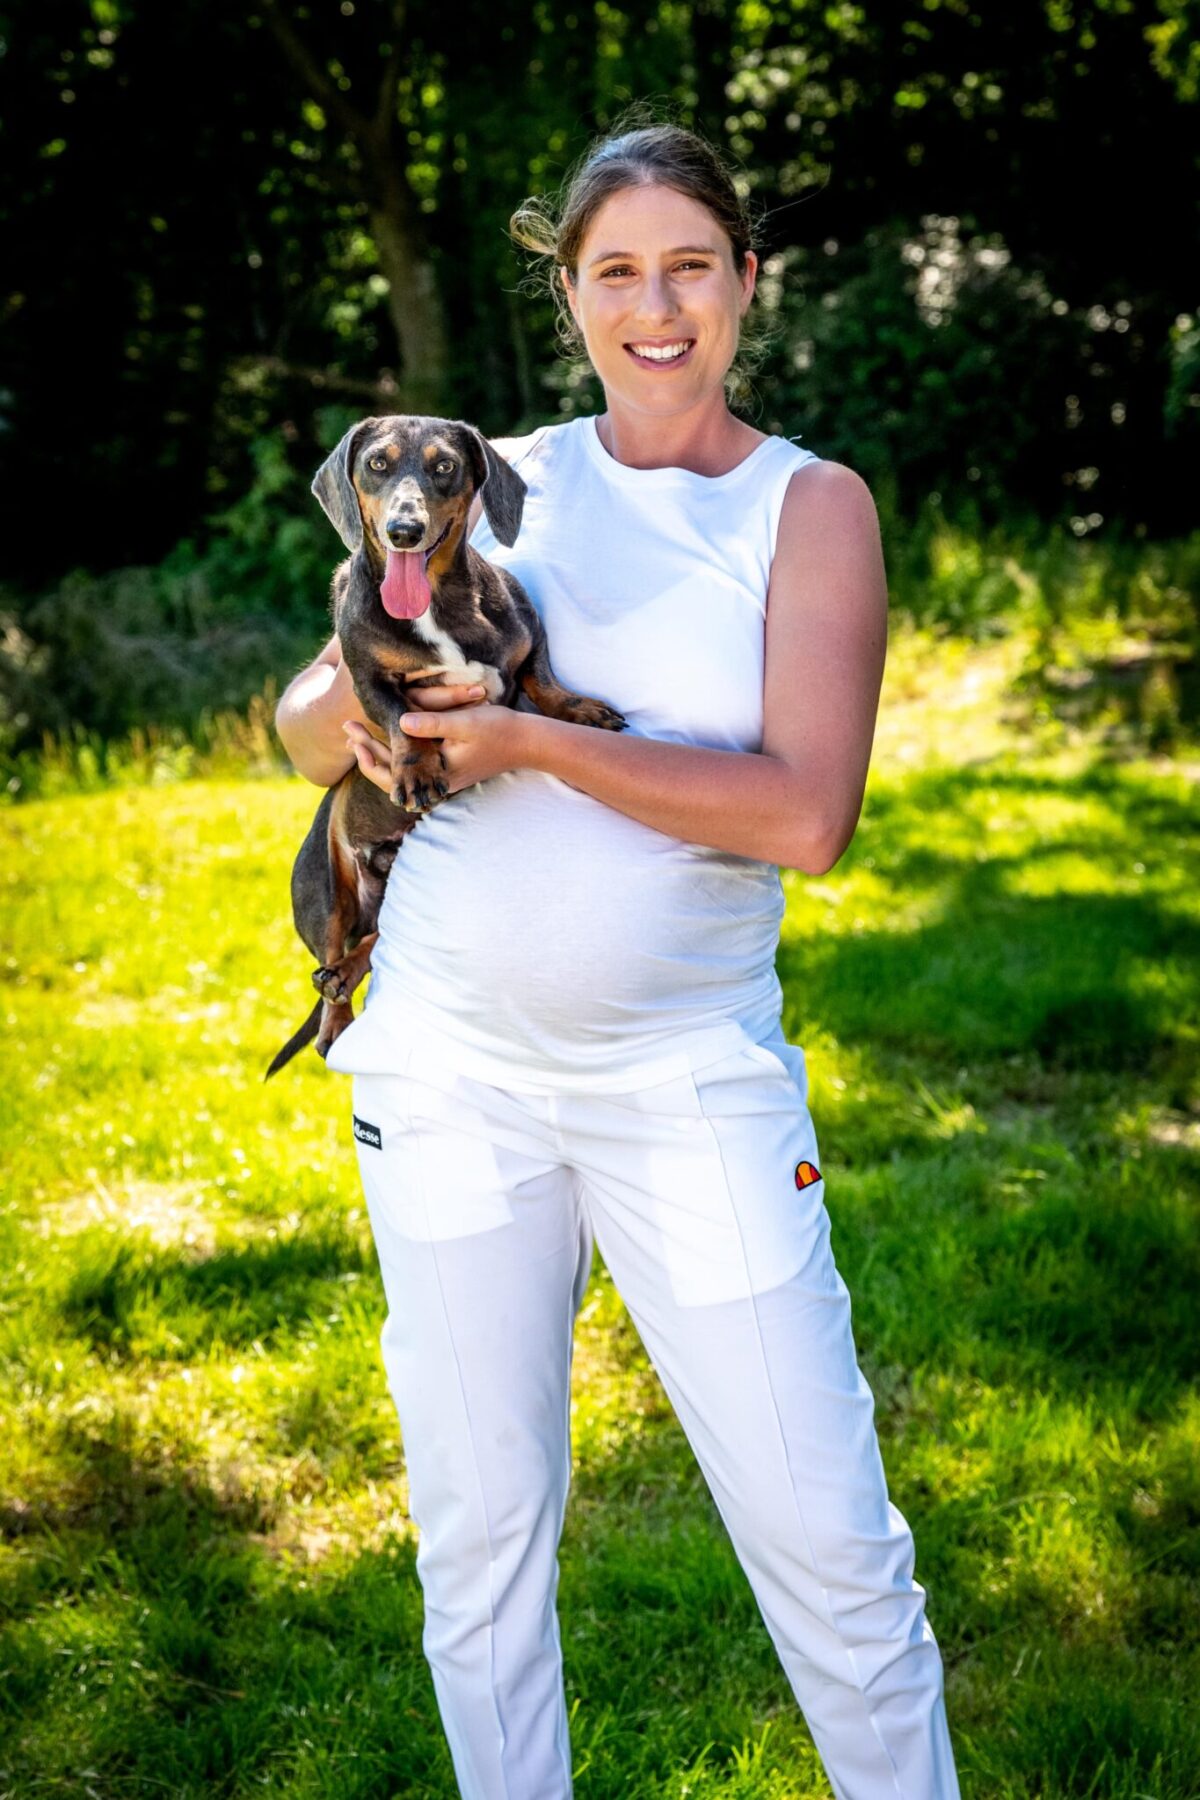 Tennis champion reveals she feeds her pets an athlete’s diet